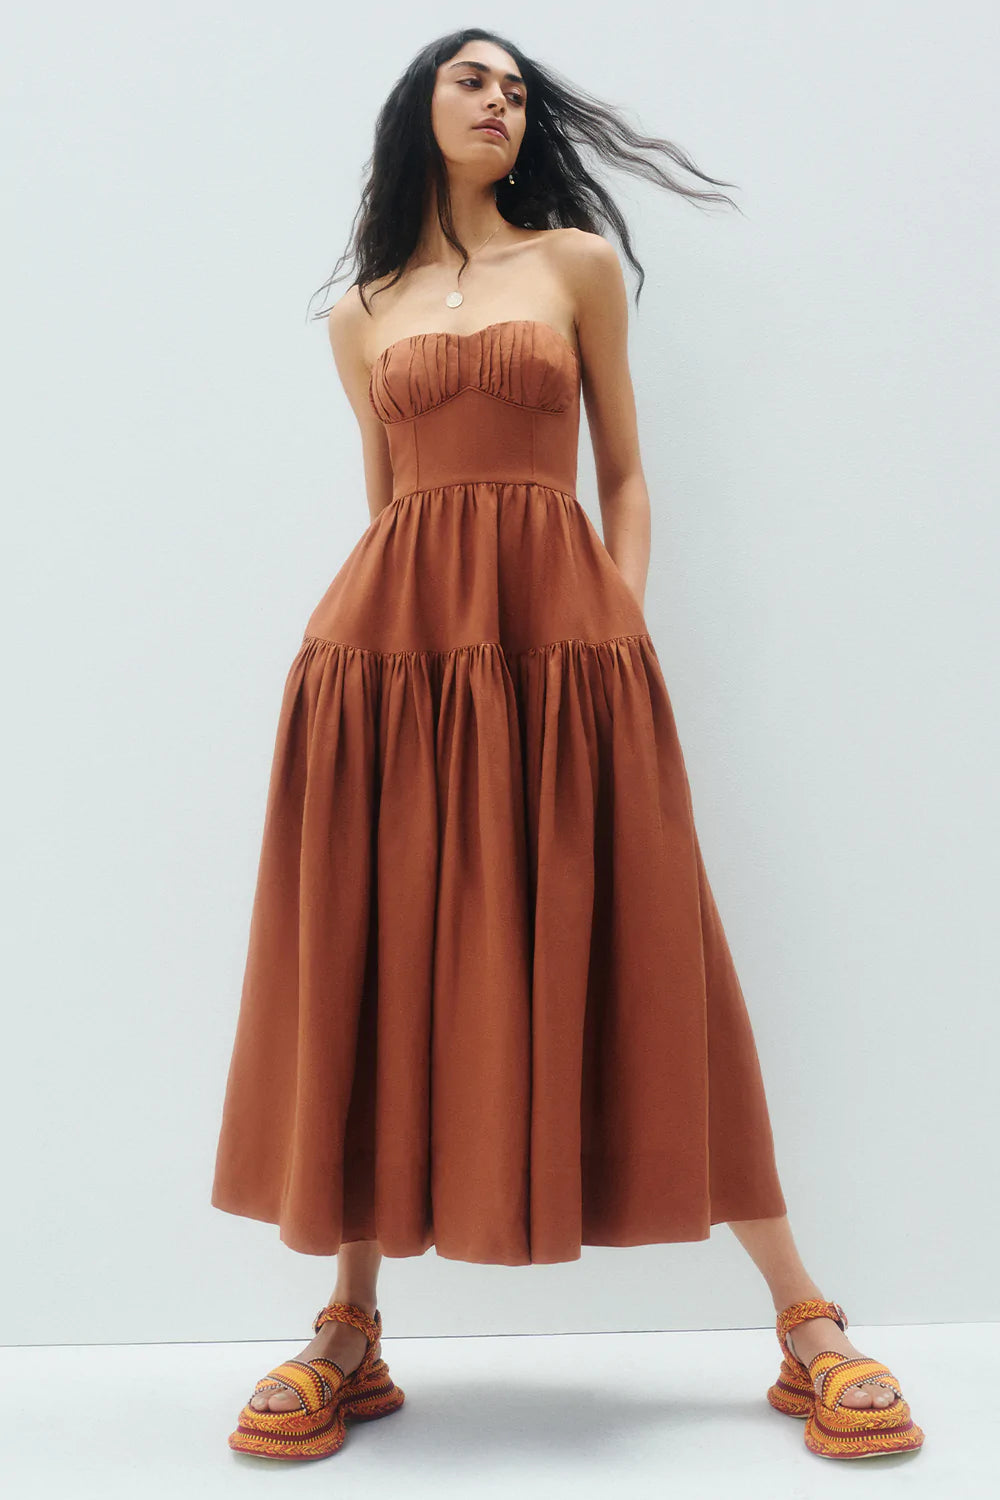 Strapless Cocktail Party Dress